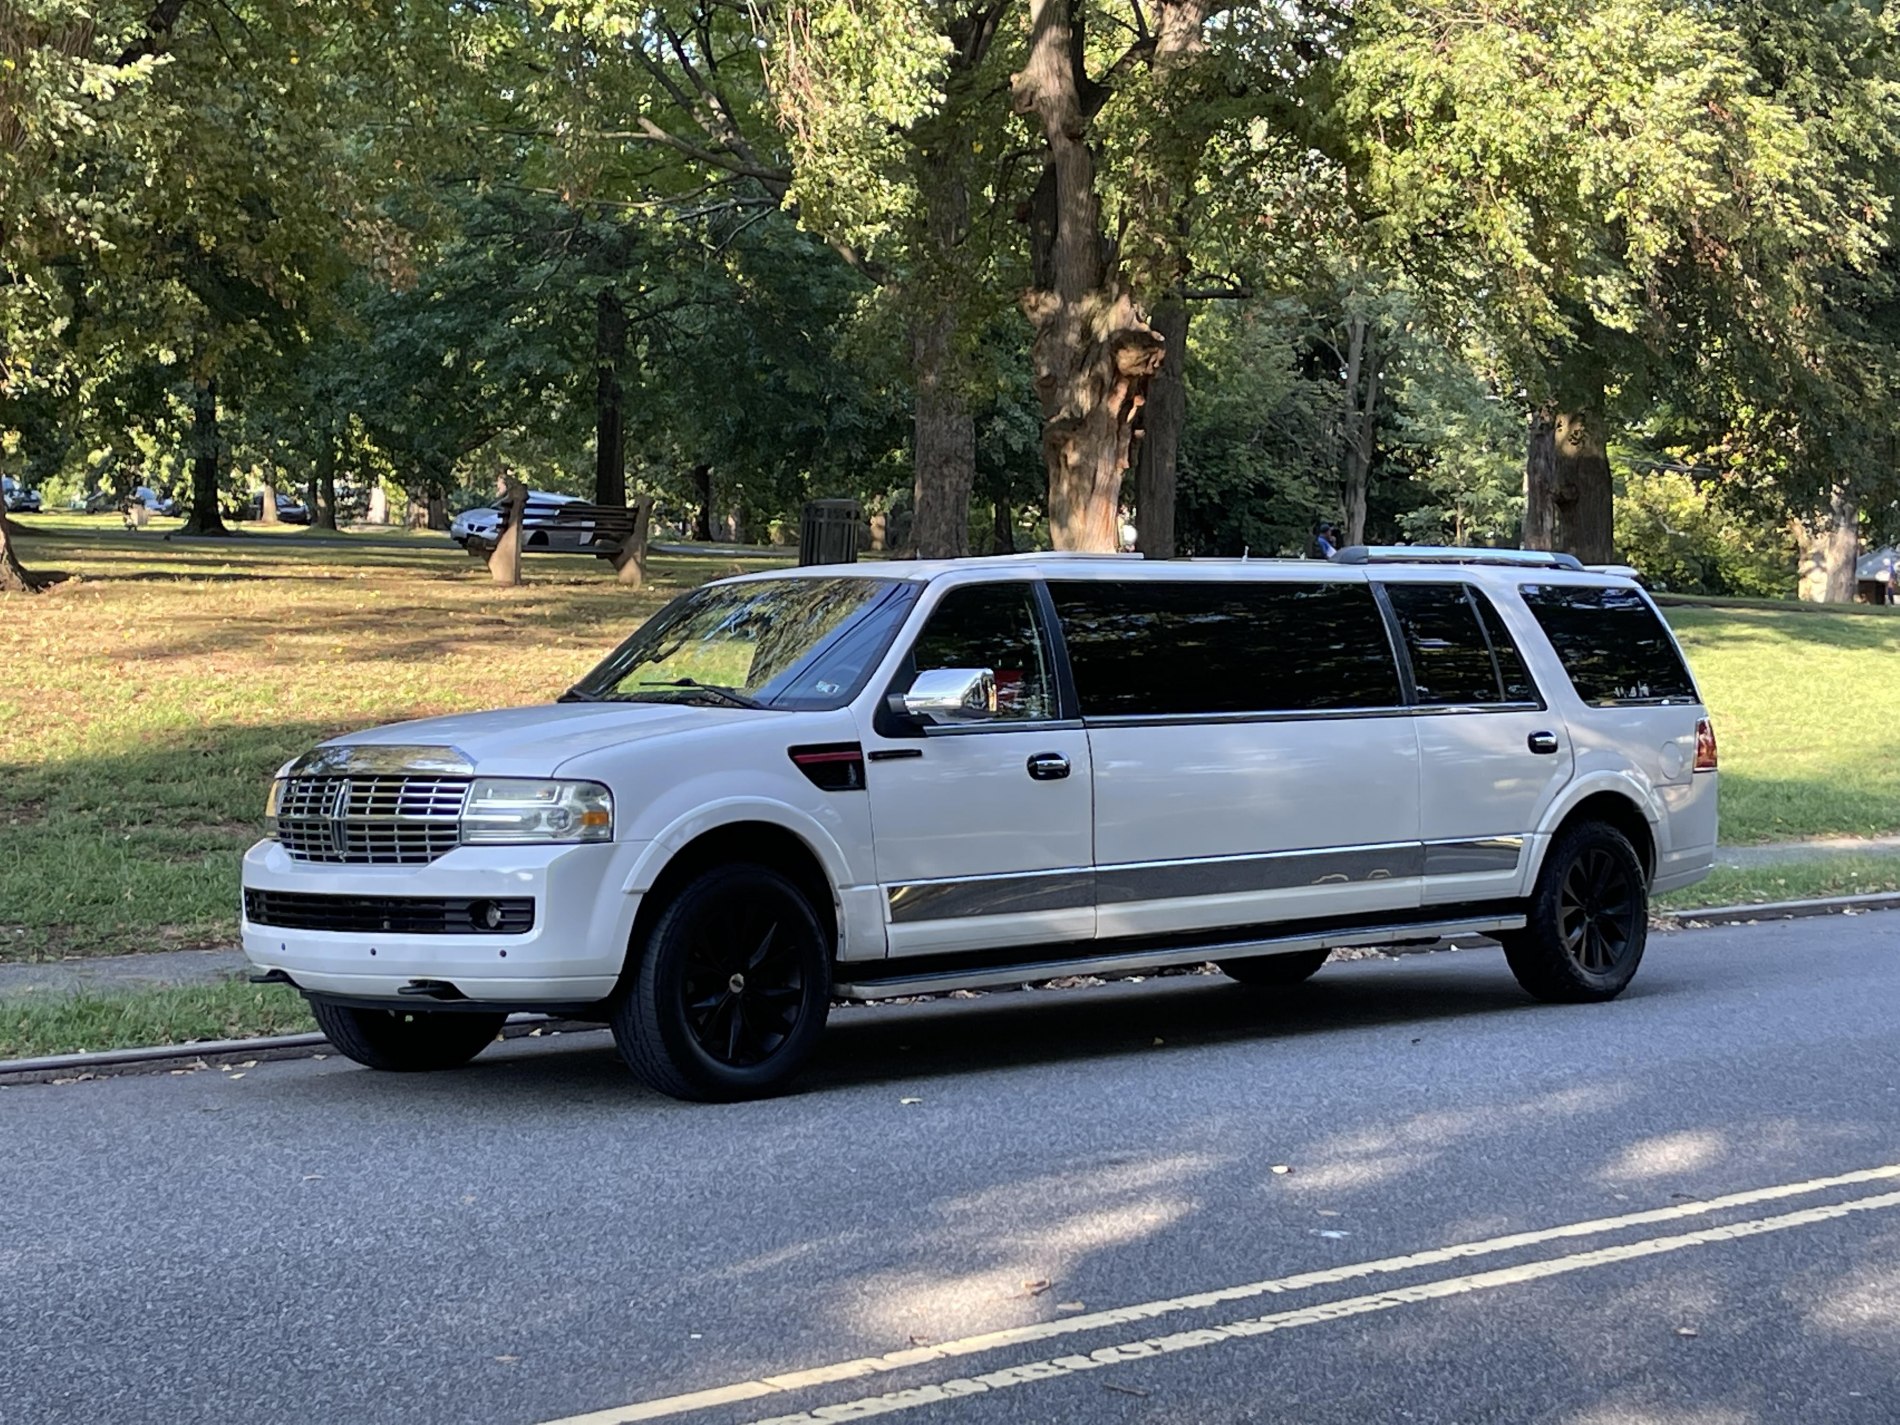 Stretch one limo offers Lincoln Navigator White for Rent in NJ and NY